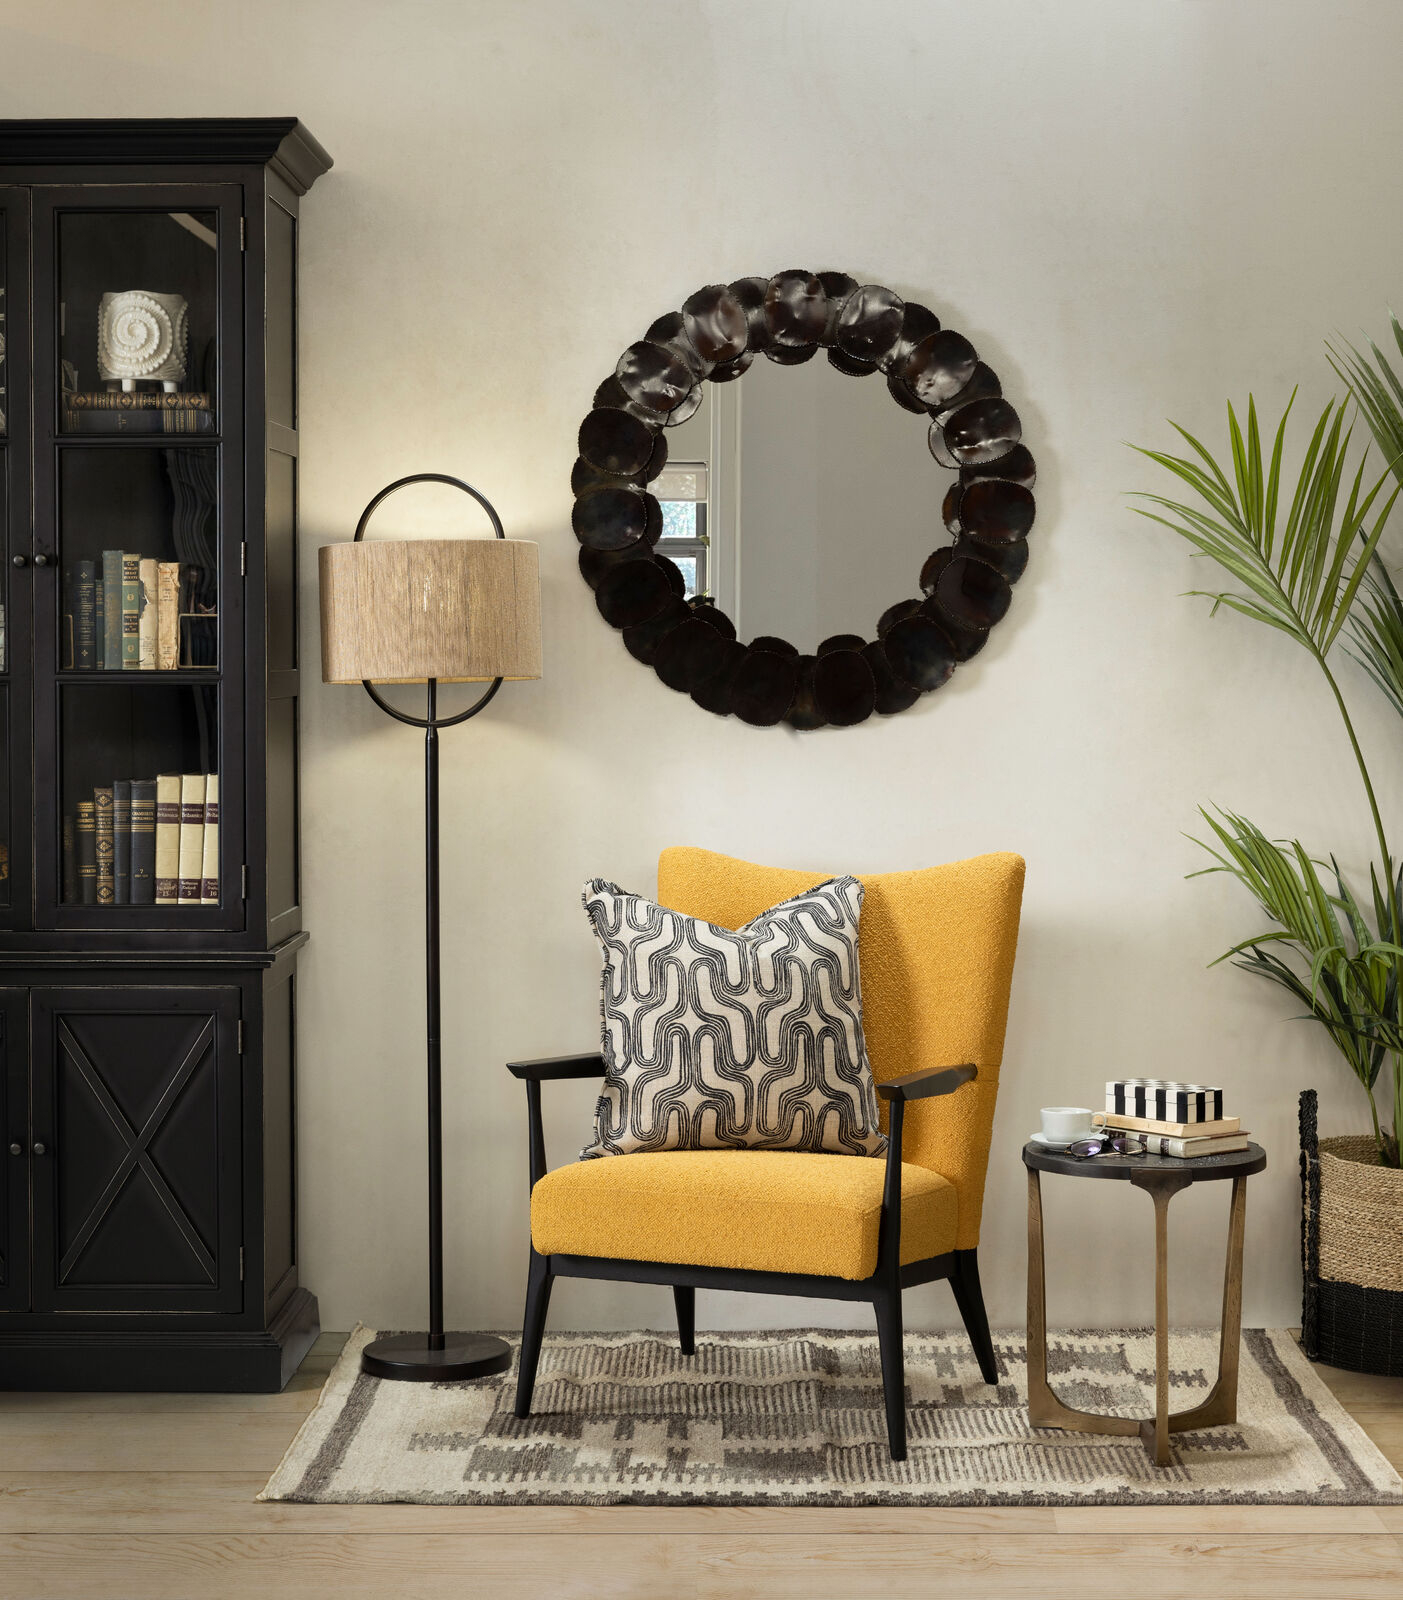 Mustard upholstered armchair with dark wooden frame 